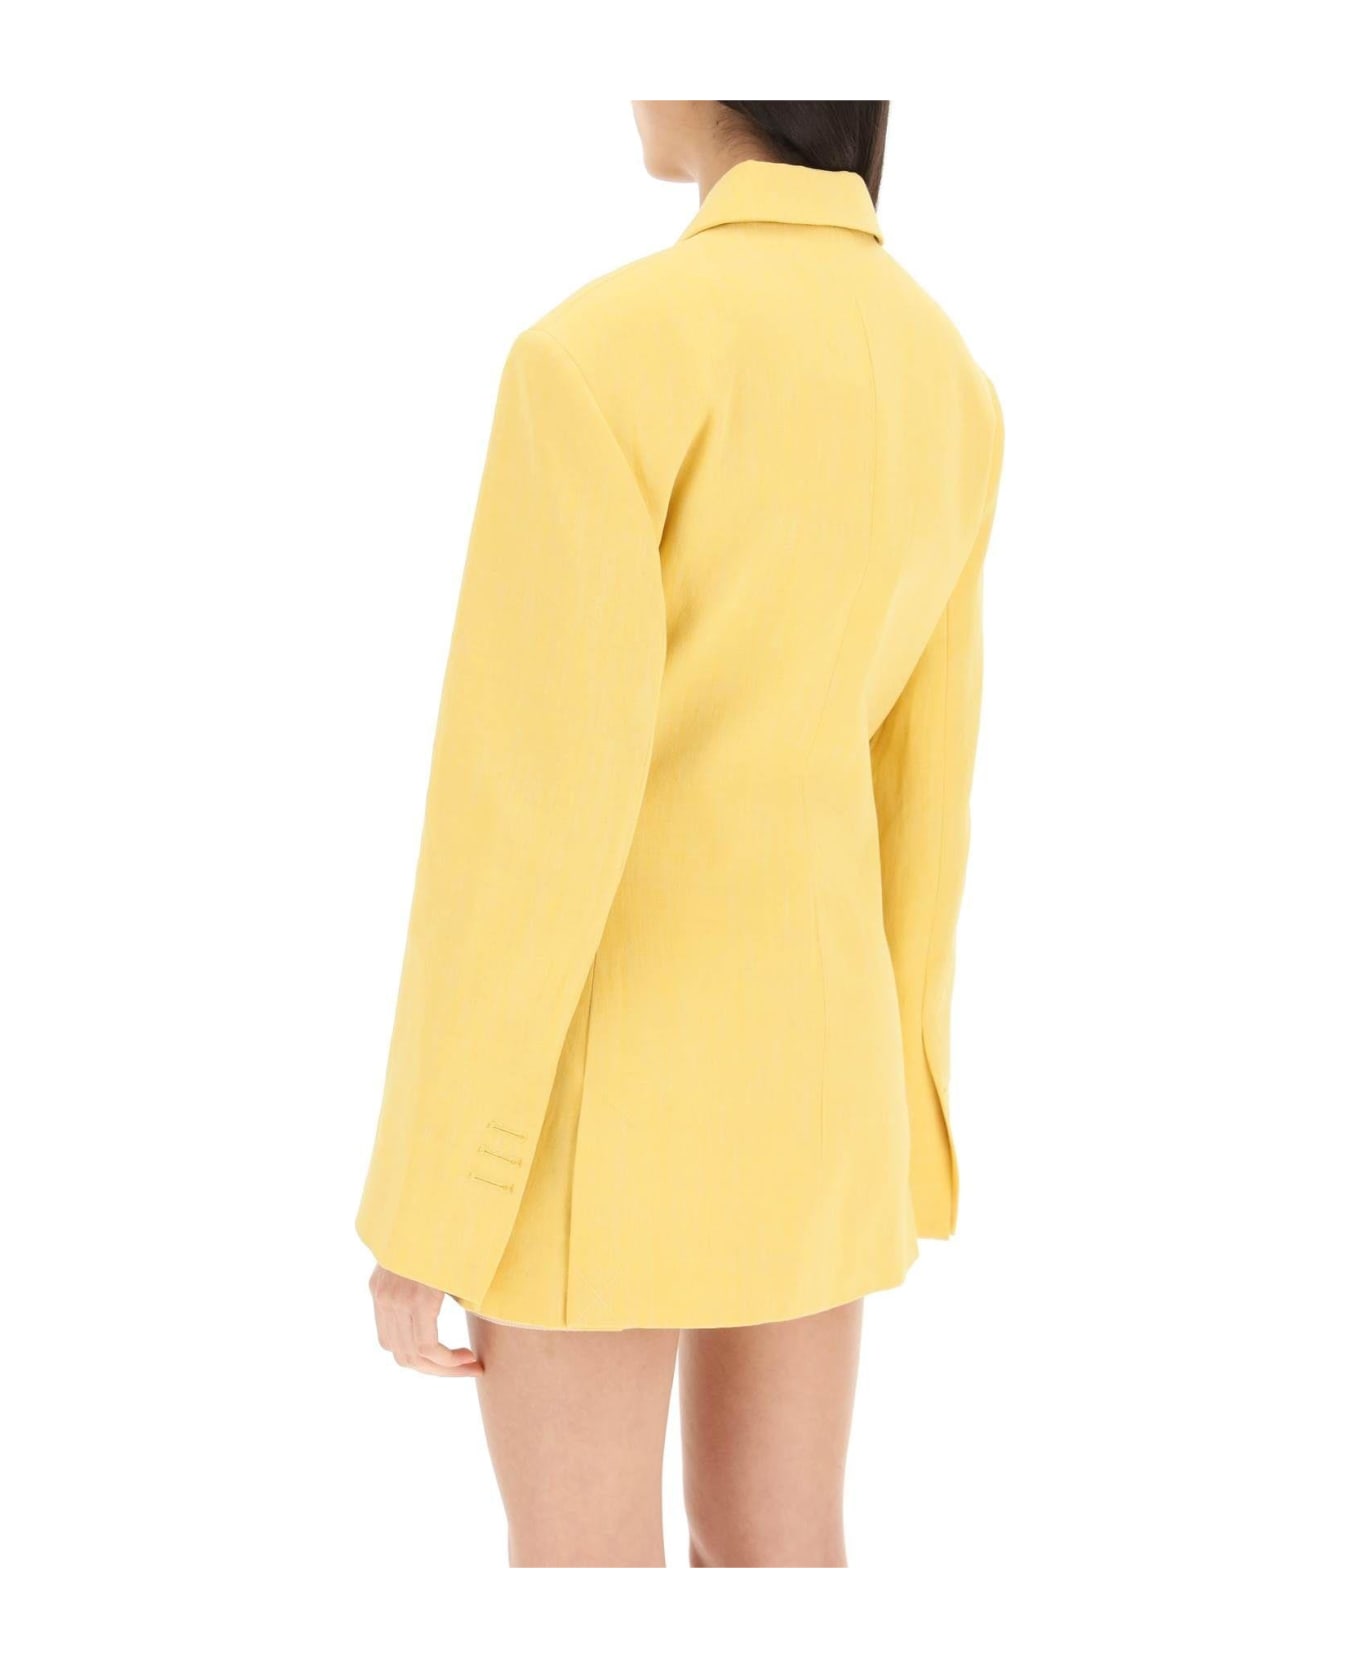 Jacquemus Double-breasted Blazer - Yellow ブレザー